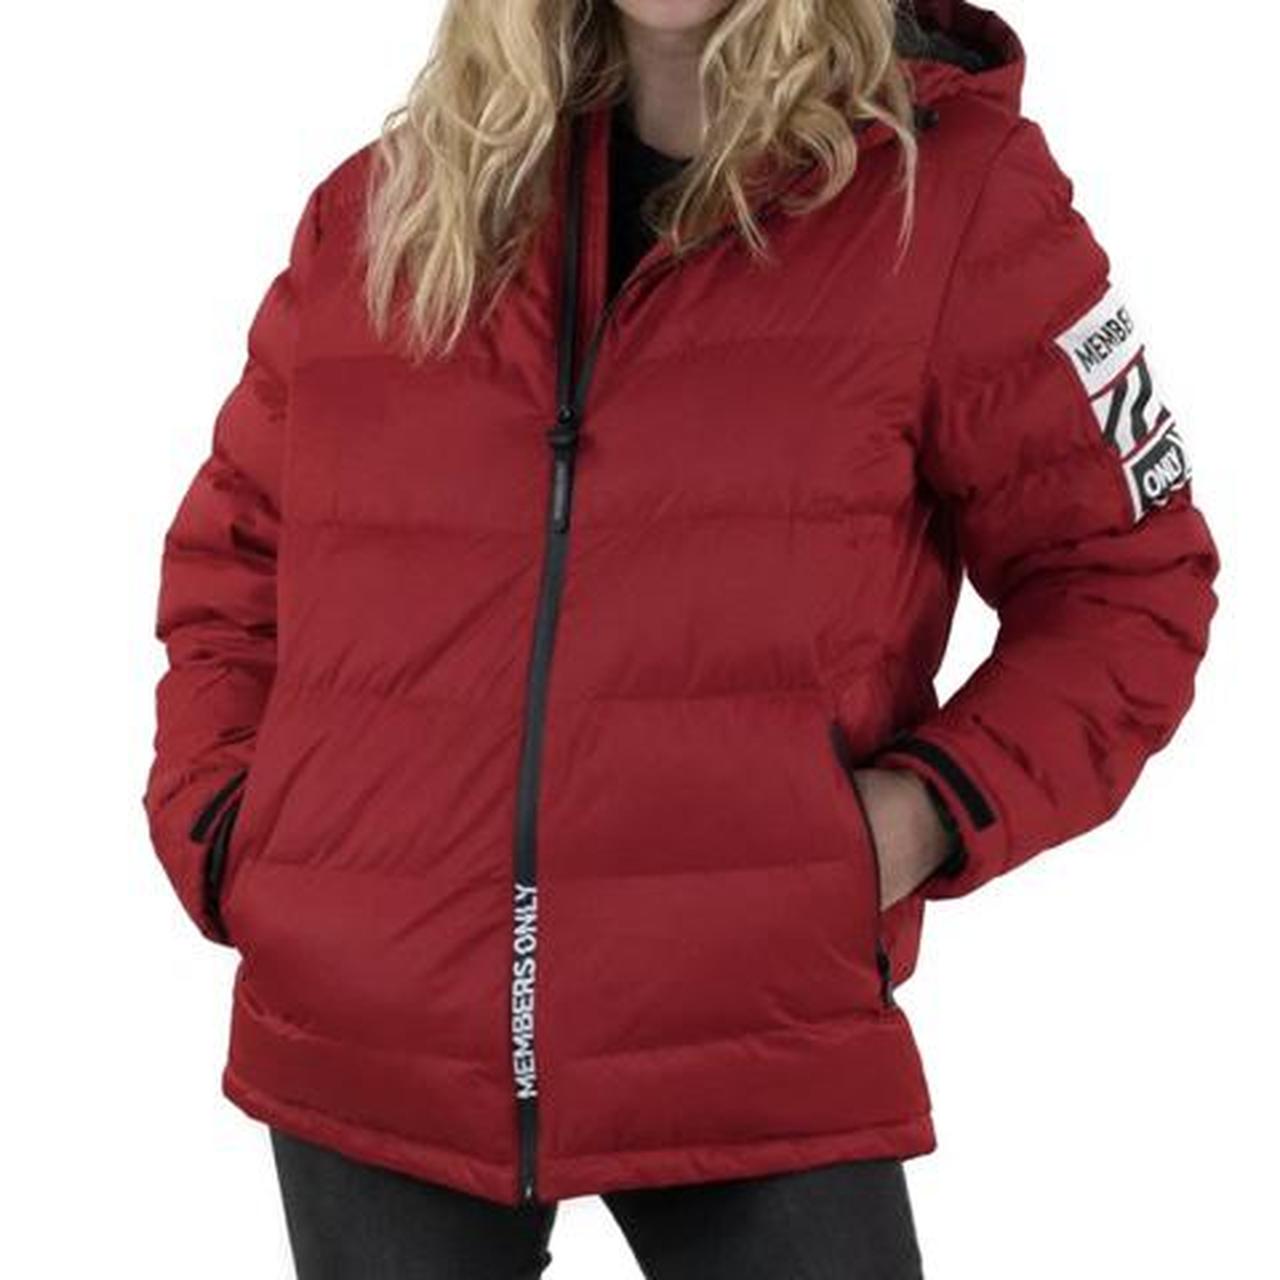 Product Image 1 - members only red puffer coat
FREE